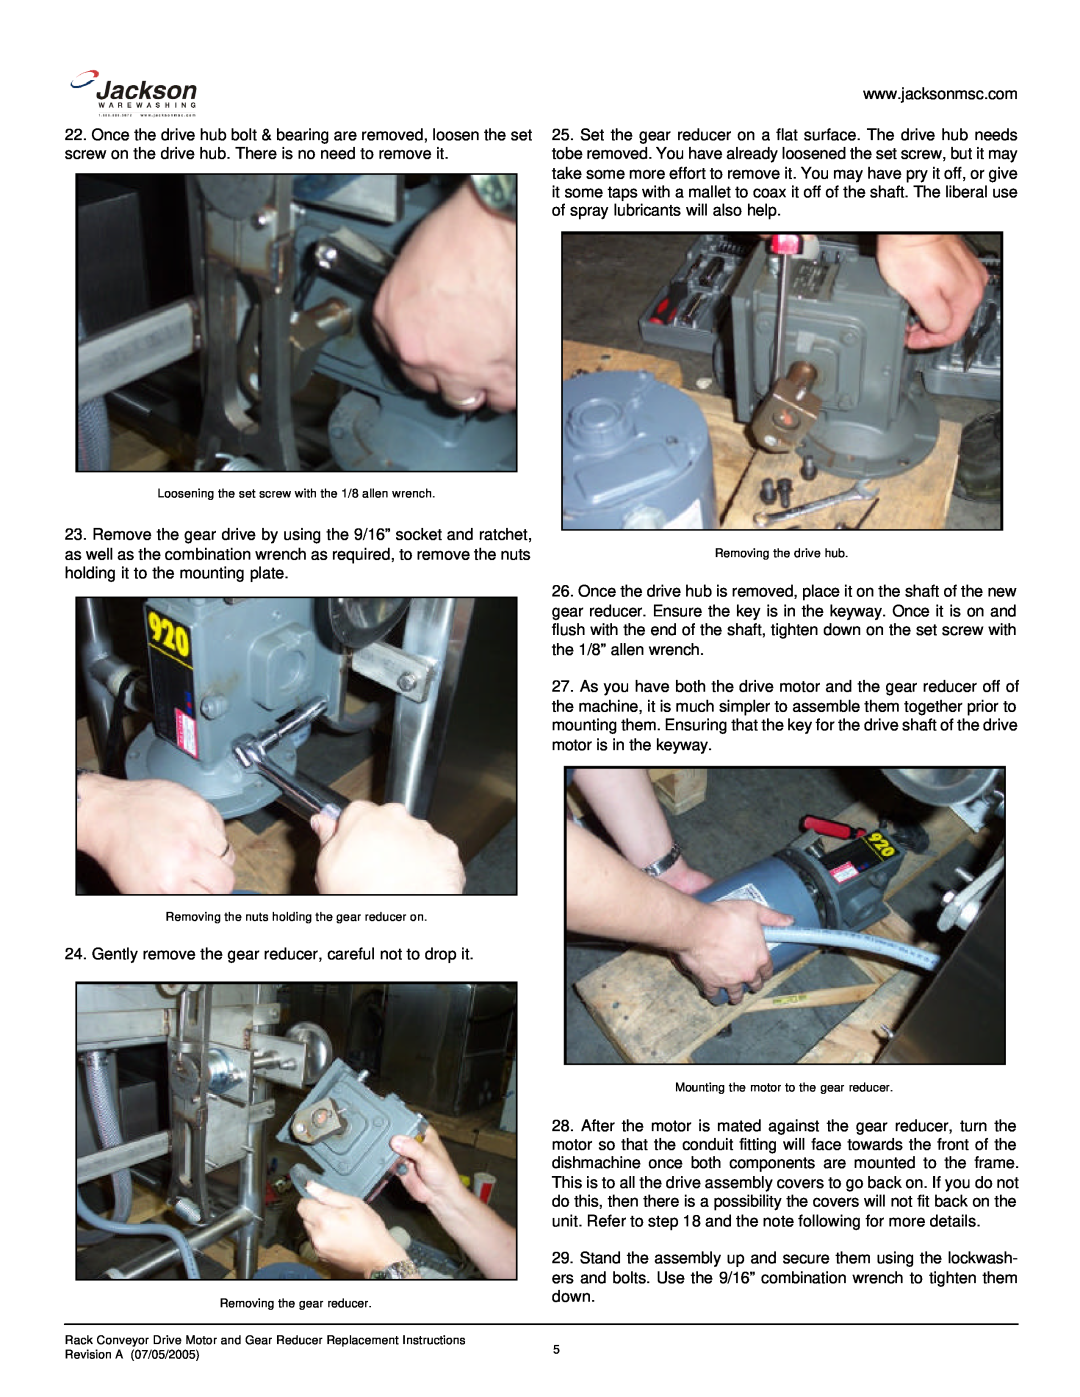 Jackson Drive Motor & Gear Reducer, 07610-003-08-78 A manual Gently remove the gear reducer, careful not to drop it 